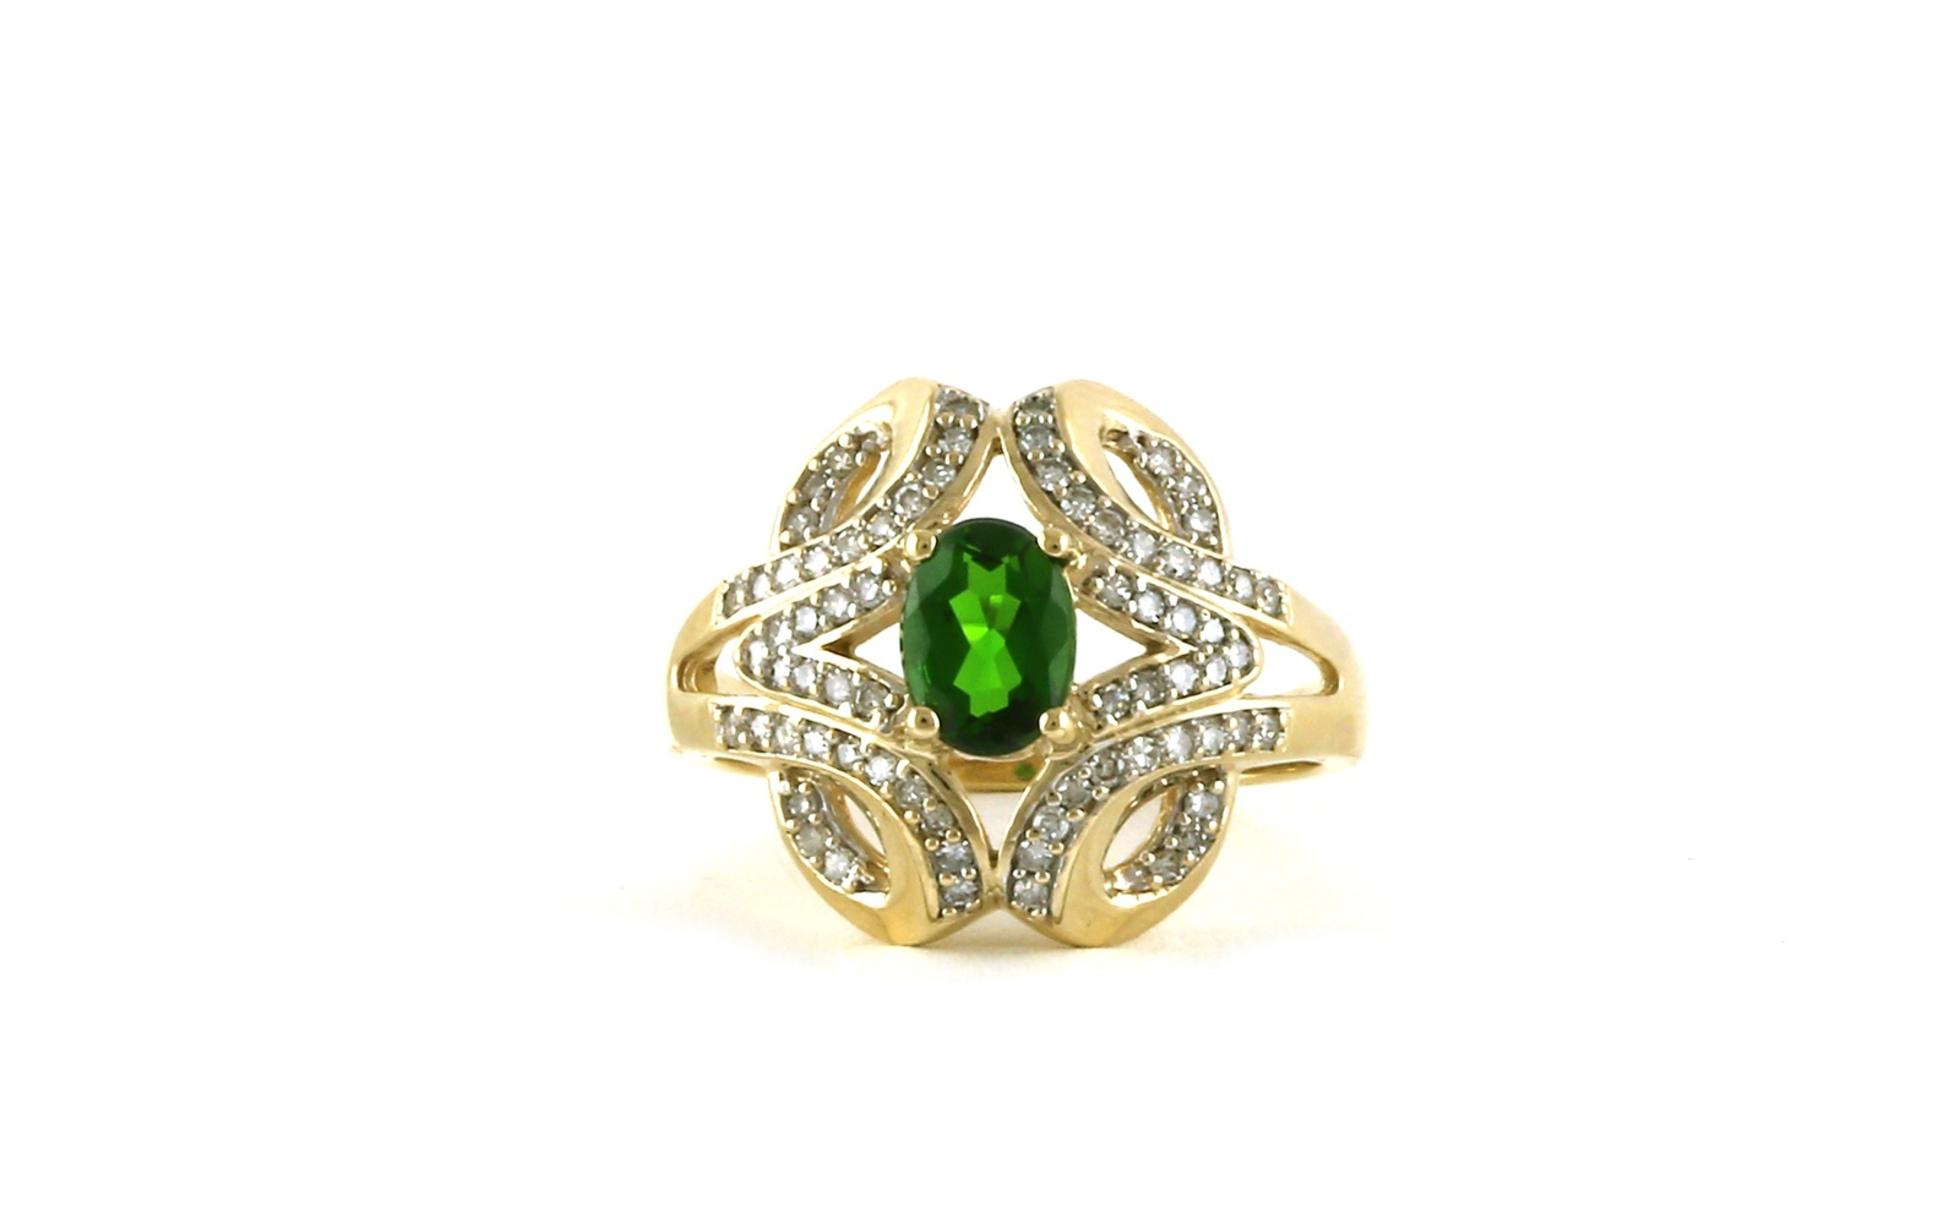 Estate Piece: Knot-style Cluster Oval Green Tourmaline and Diamond Ring in Yellow Gold